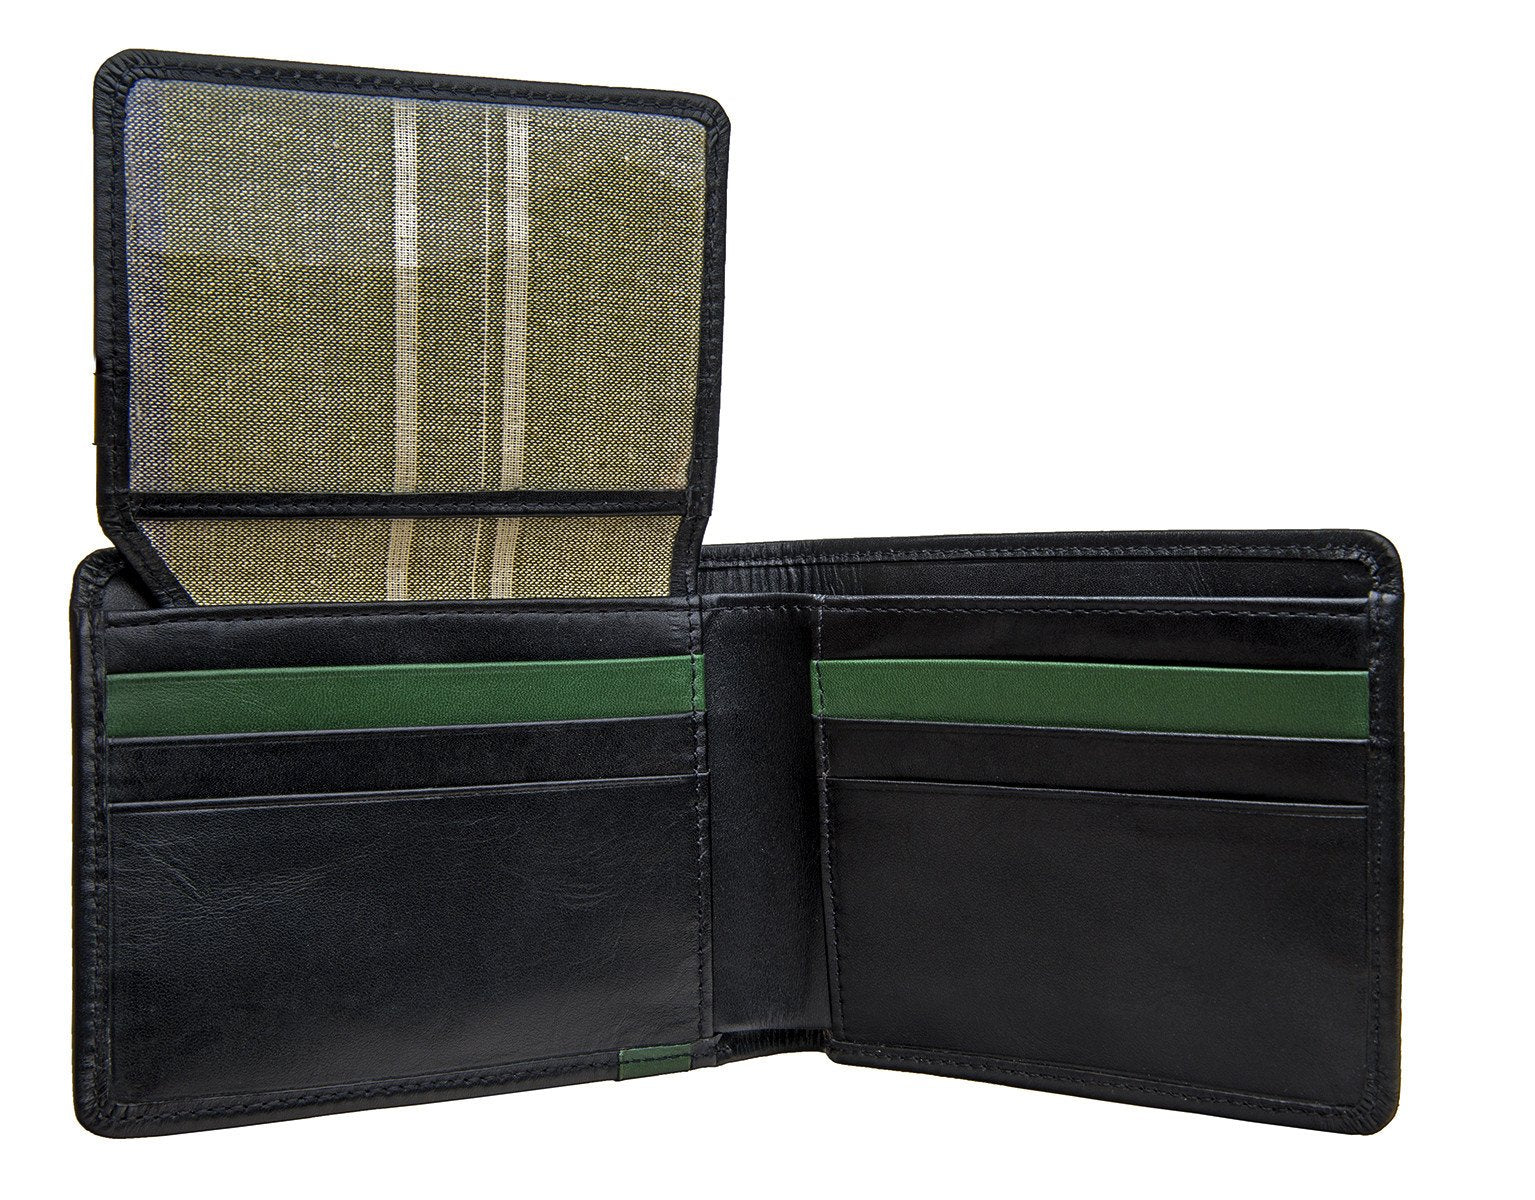 Dylan 05 Leather Multi-Compartment Trifold Wallet